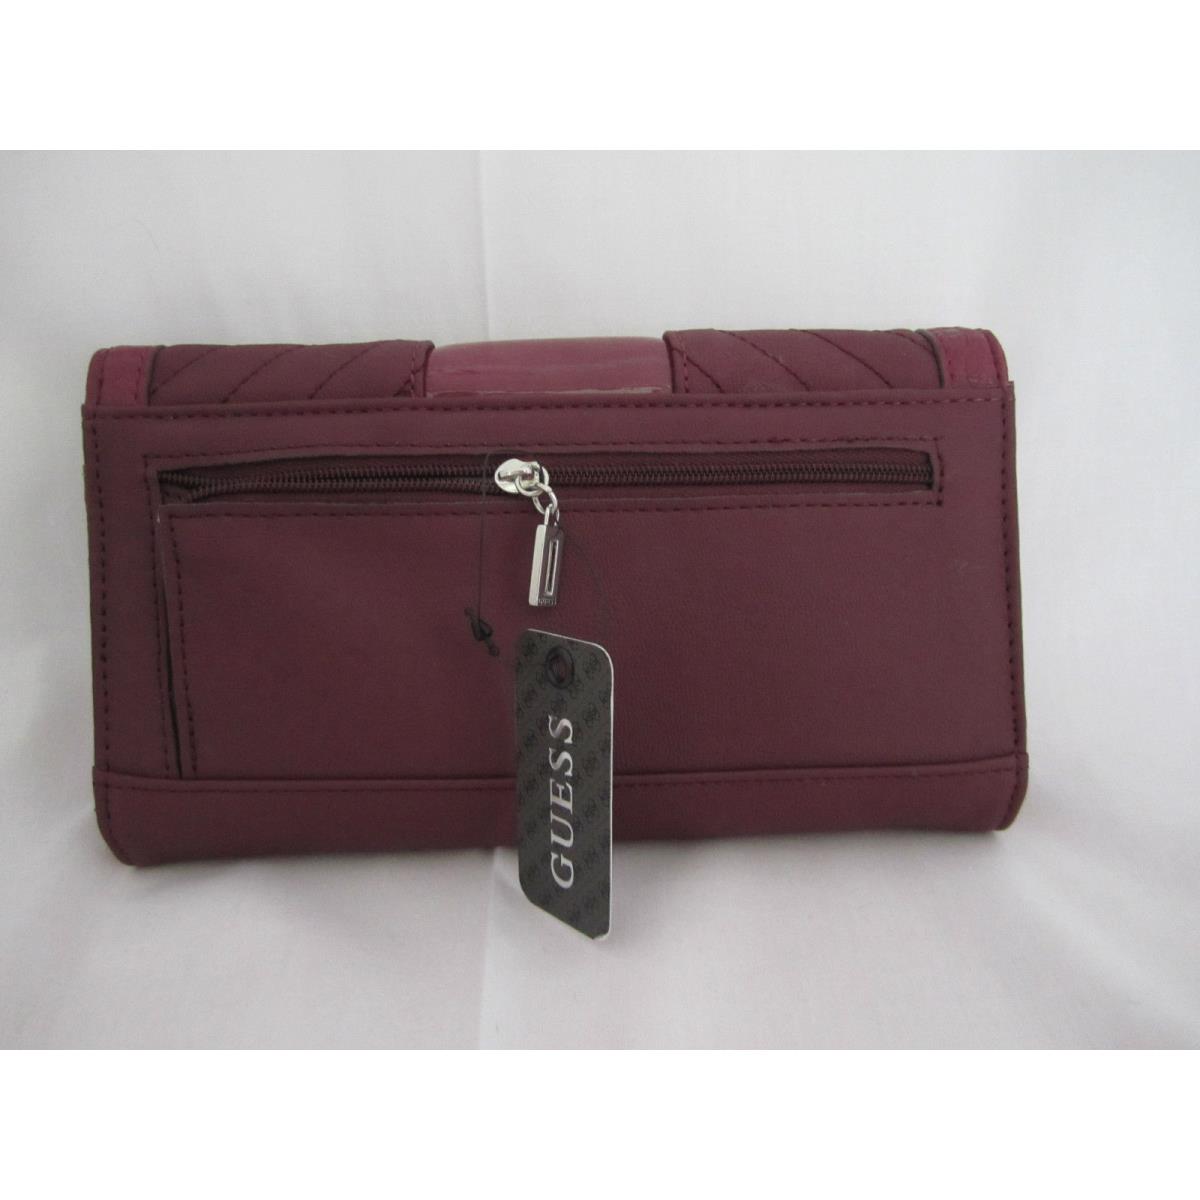 Guess Belicia Slg Checkbook Wallet Ruby Style VY357638